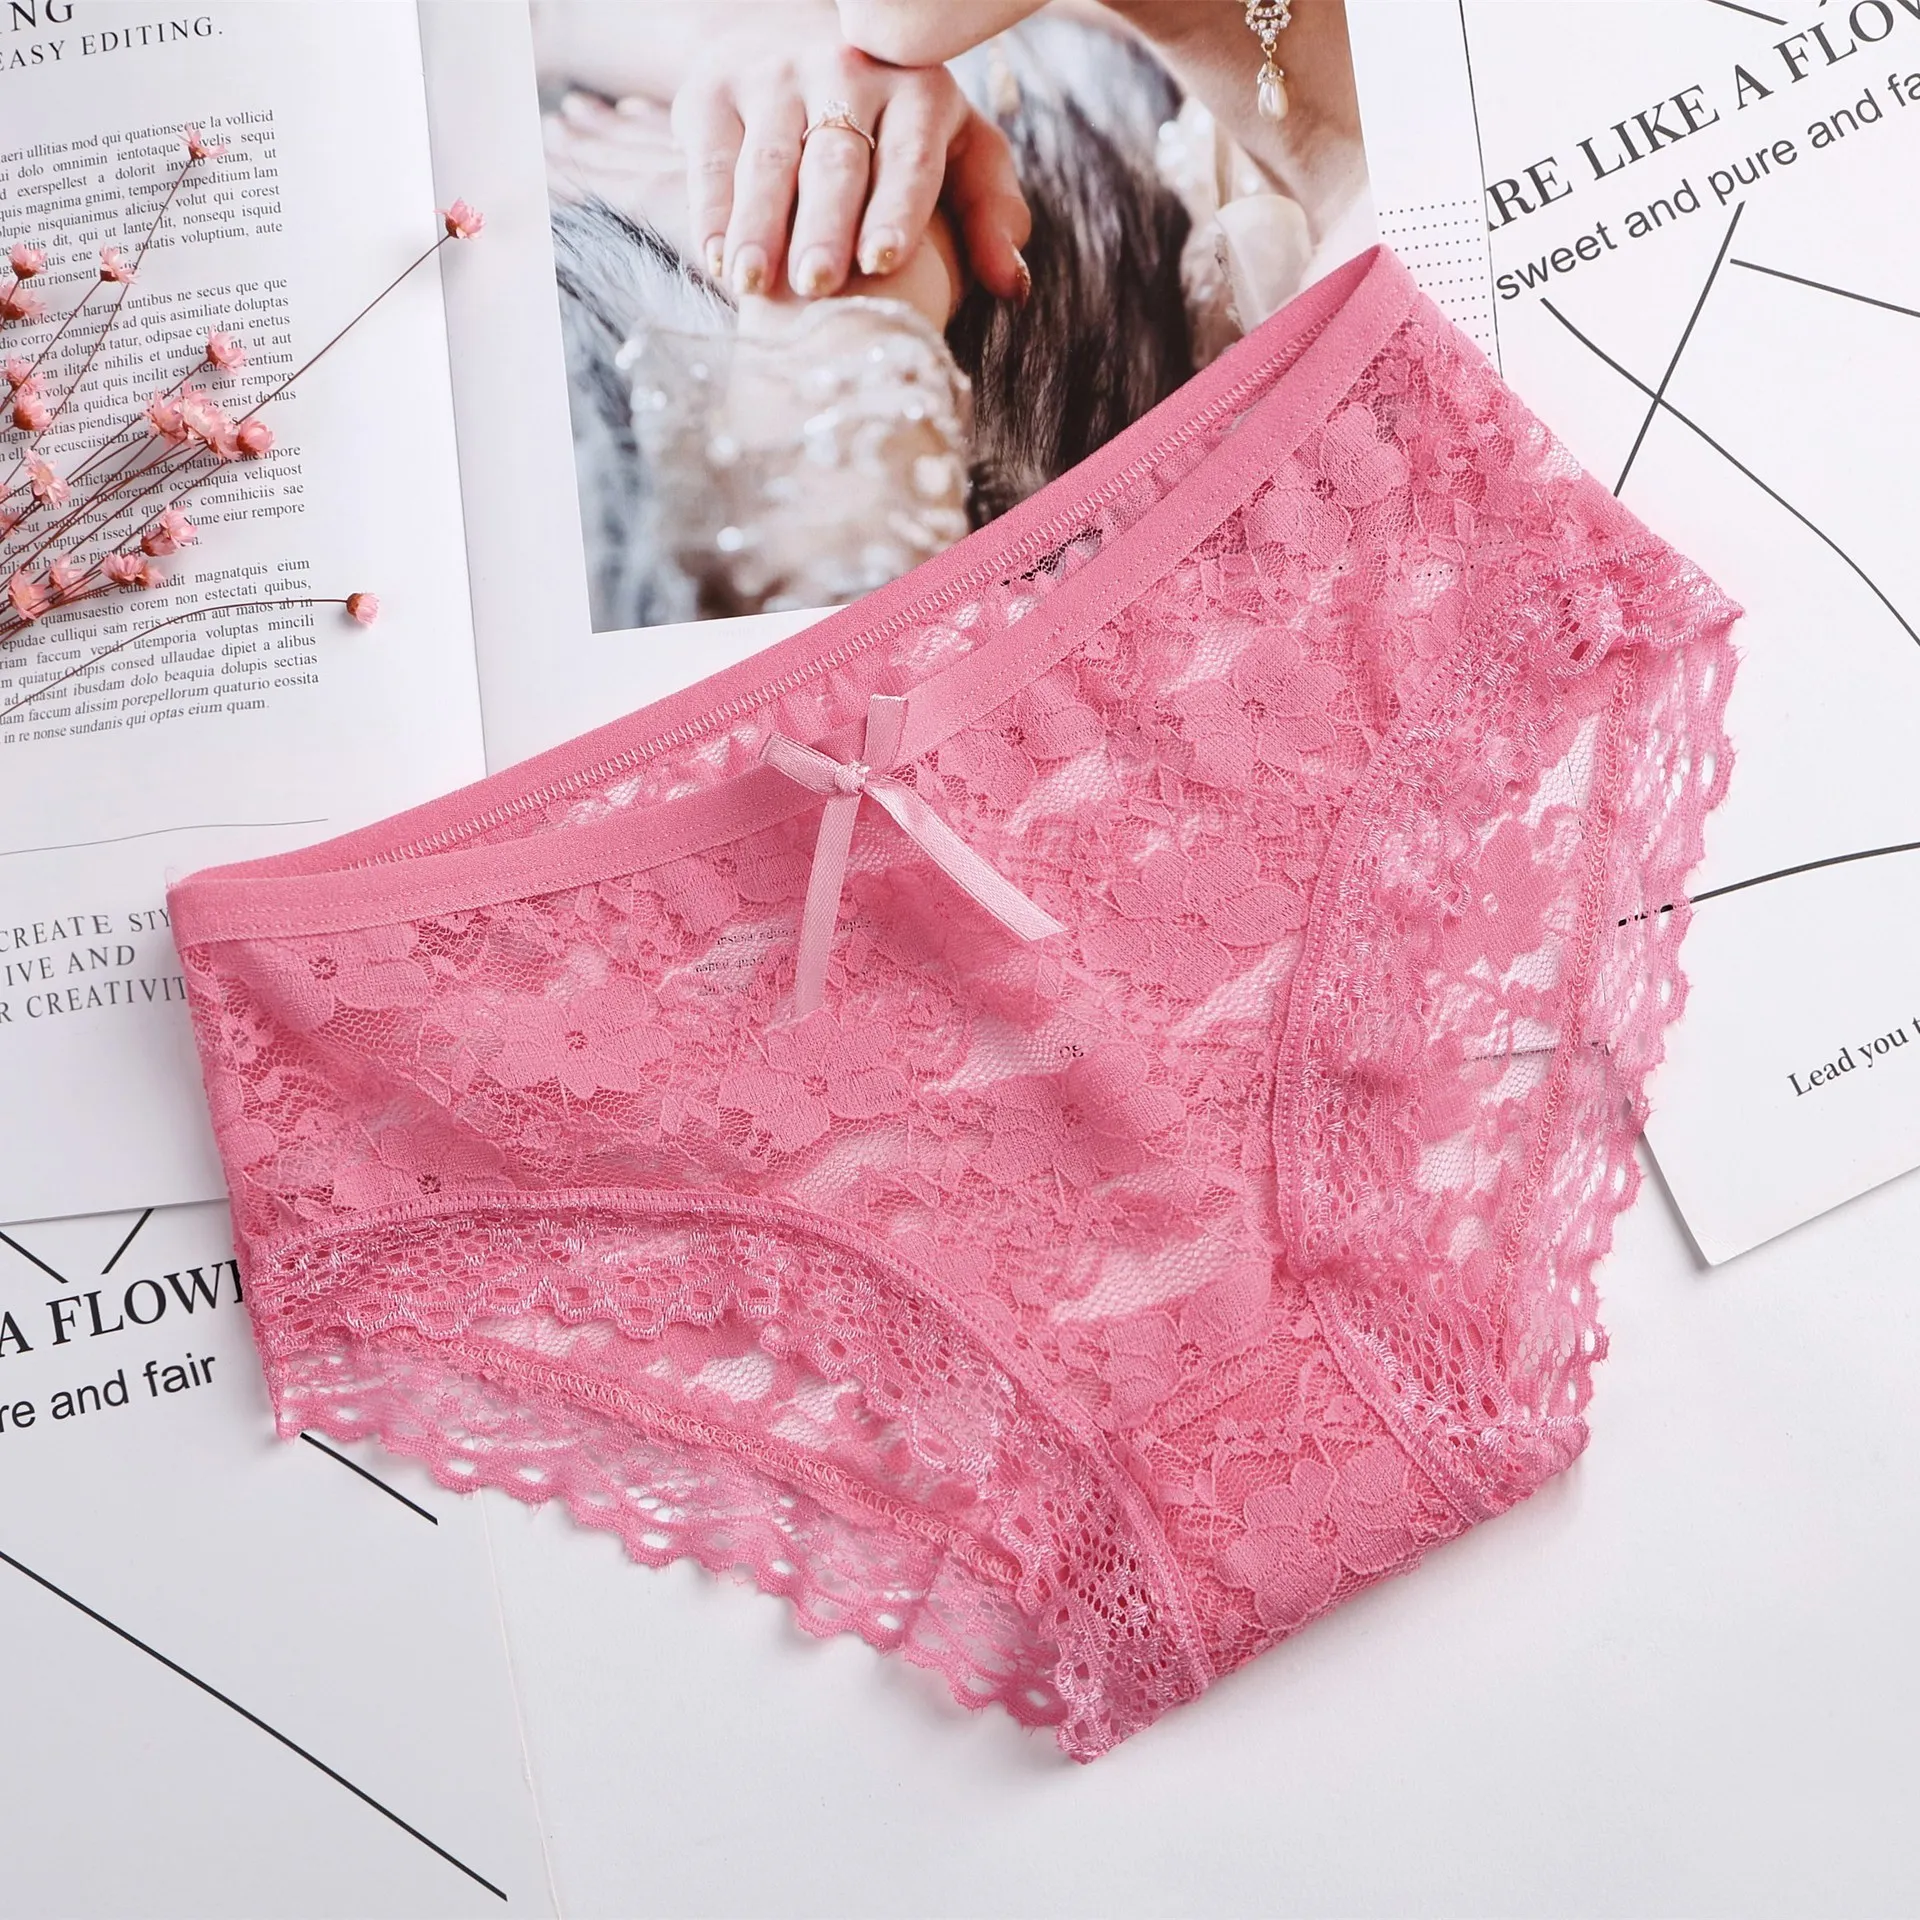 Briefs for Women Lace Cotton Sexy Lingerie Panties Girls Underwear Solid Color Bow Tie Underpants Ladies Panty Calcinha - Color: Watermelon red